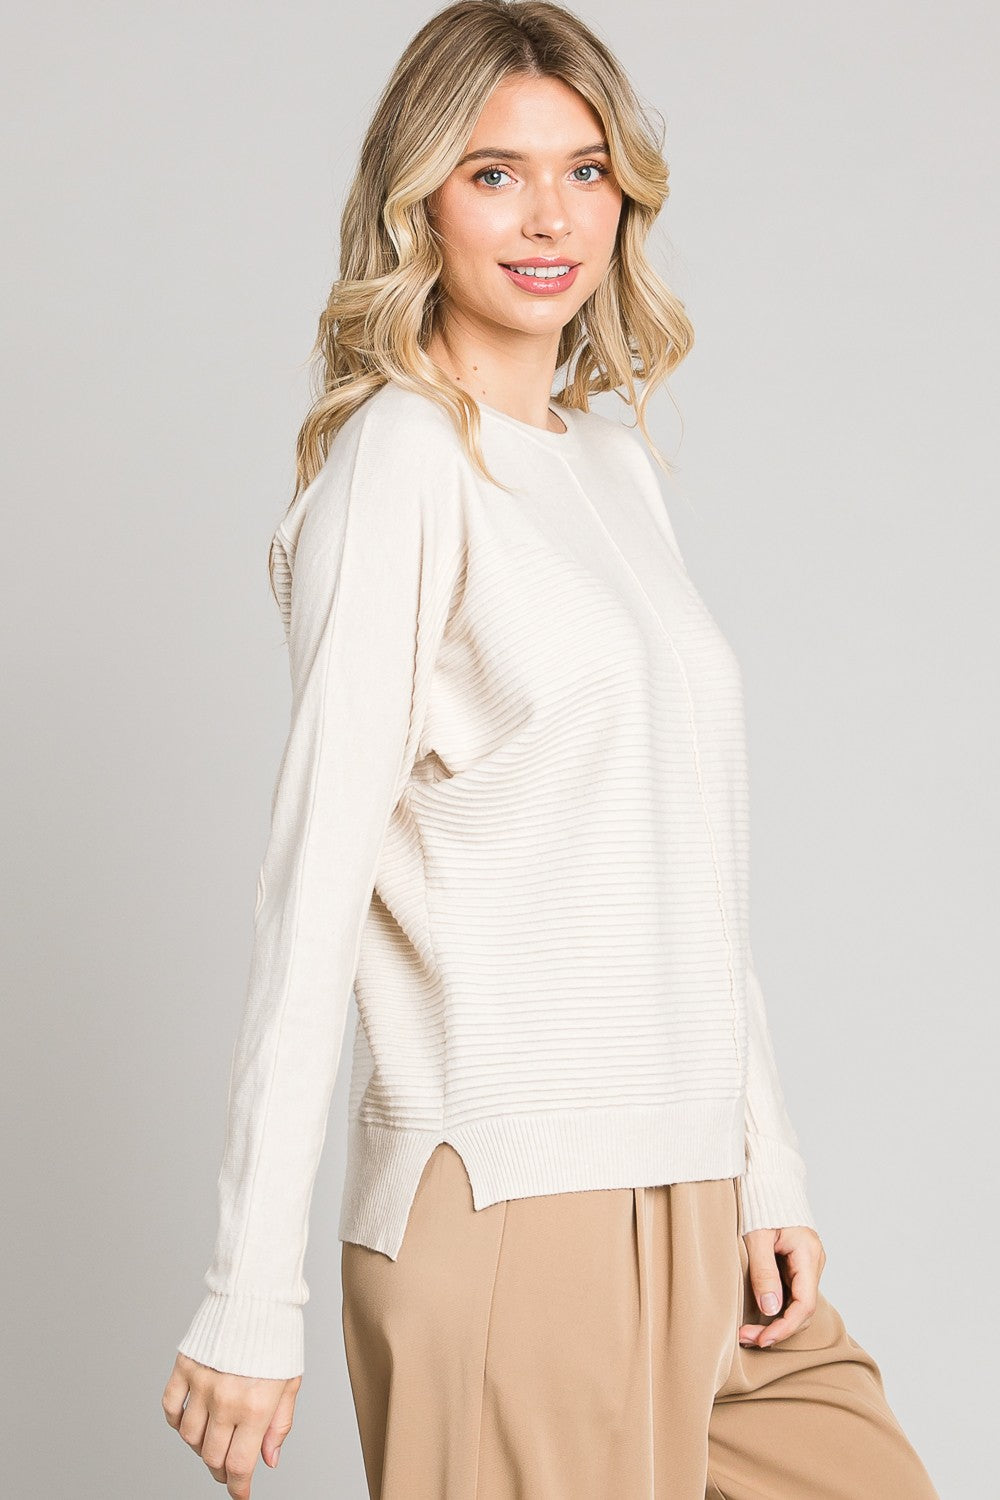 Sweetheart Textured Top | 4 Colors - All Sales Final